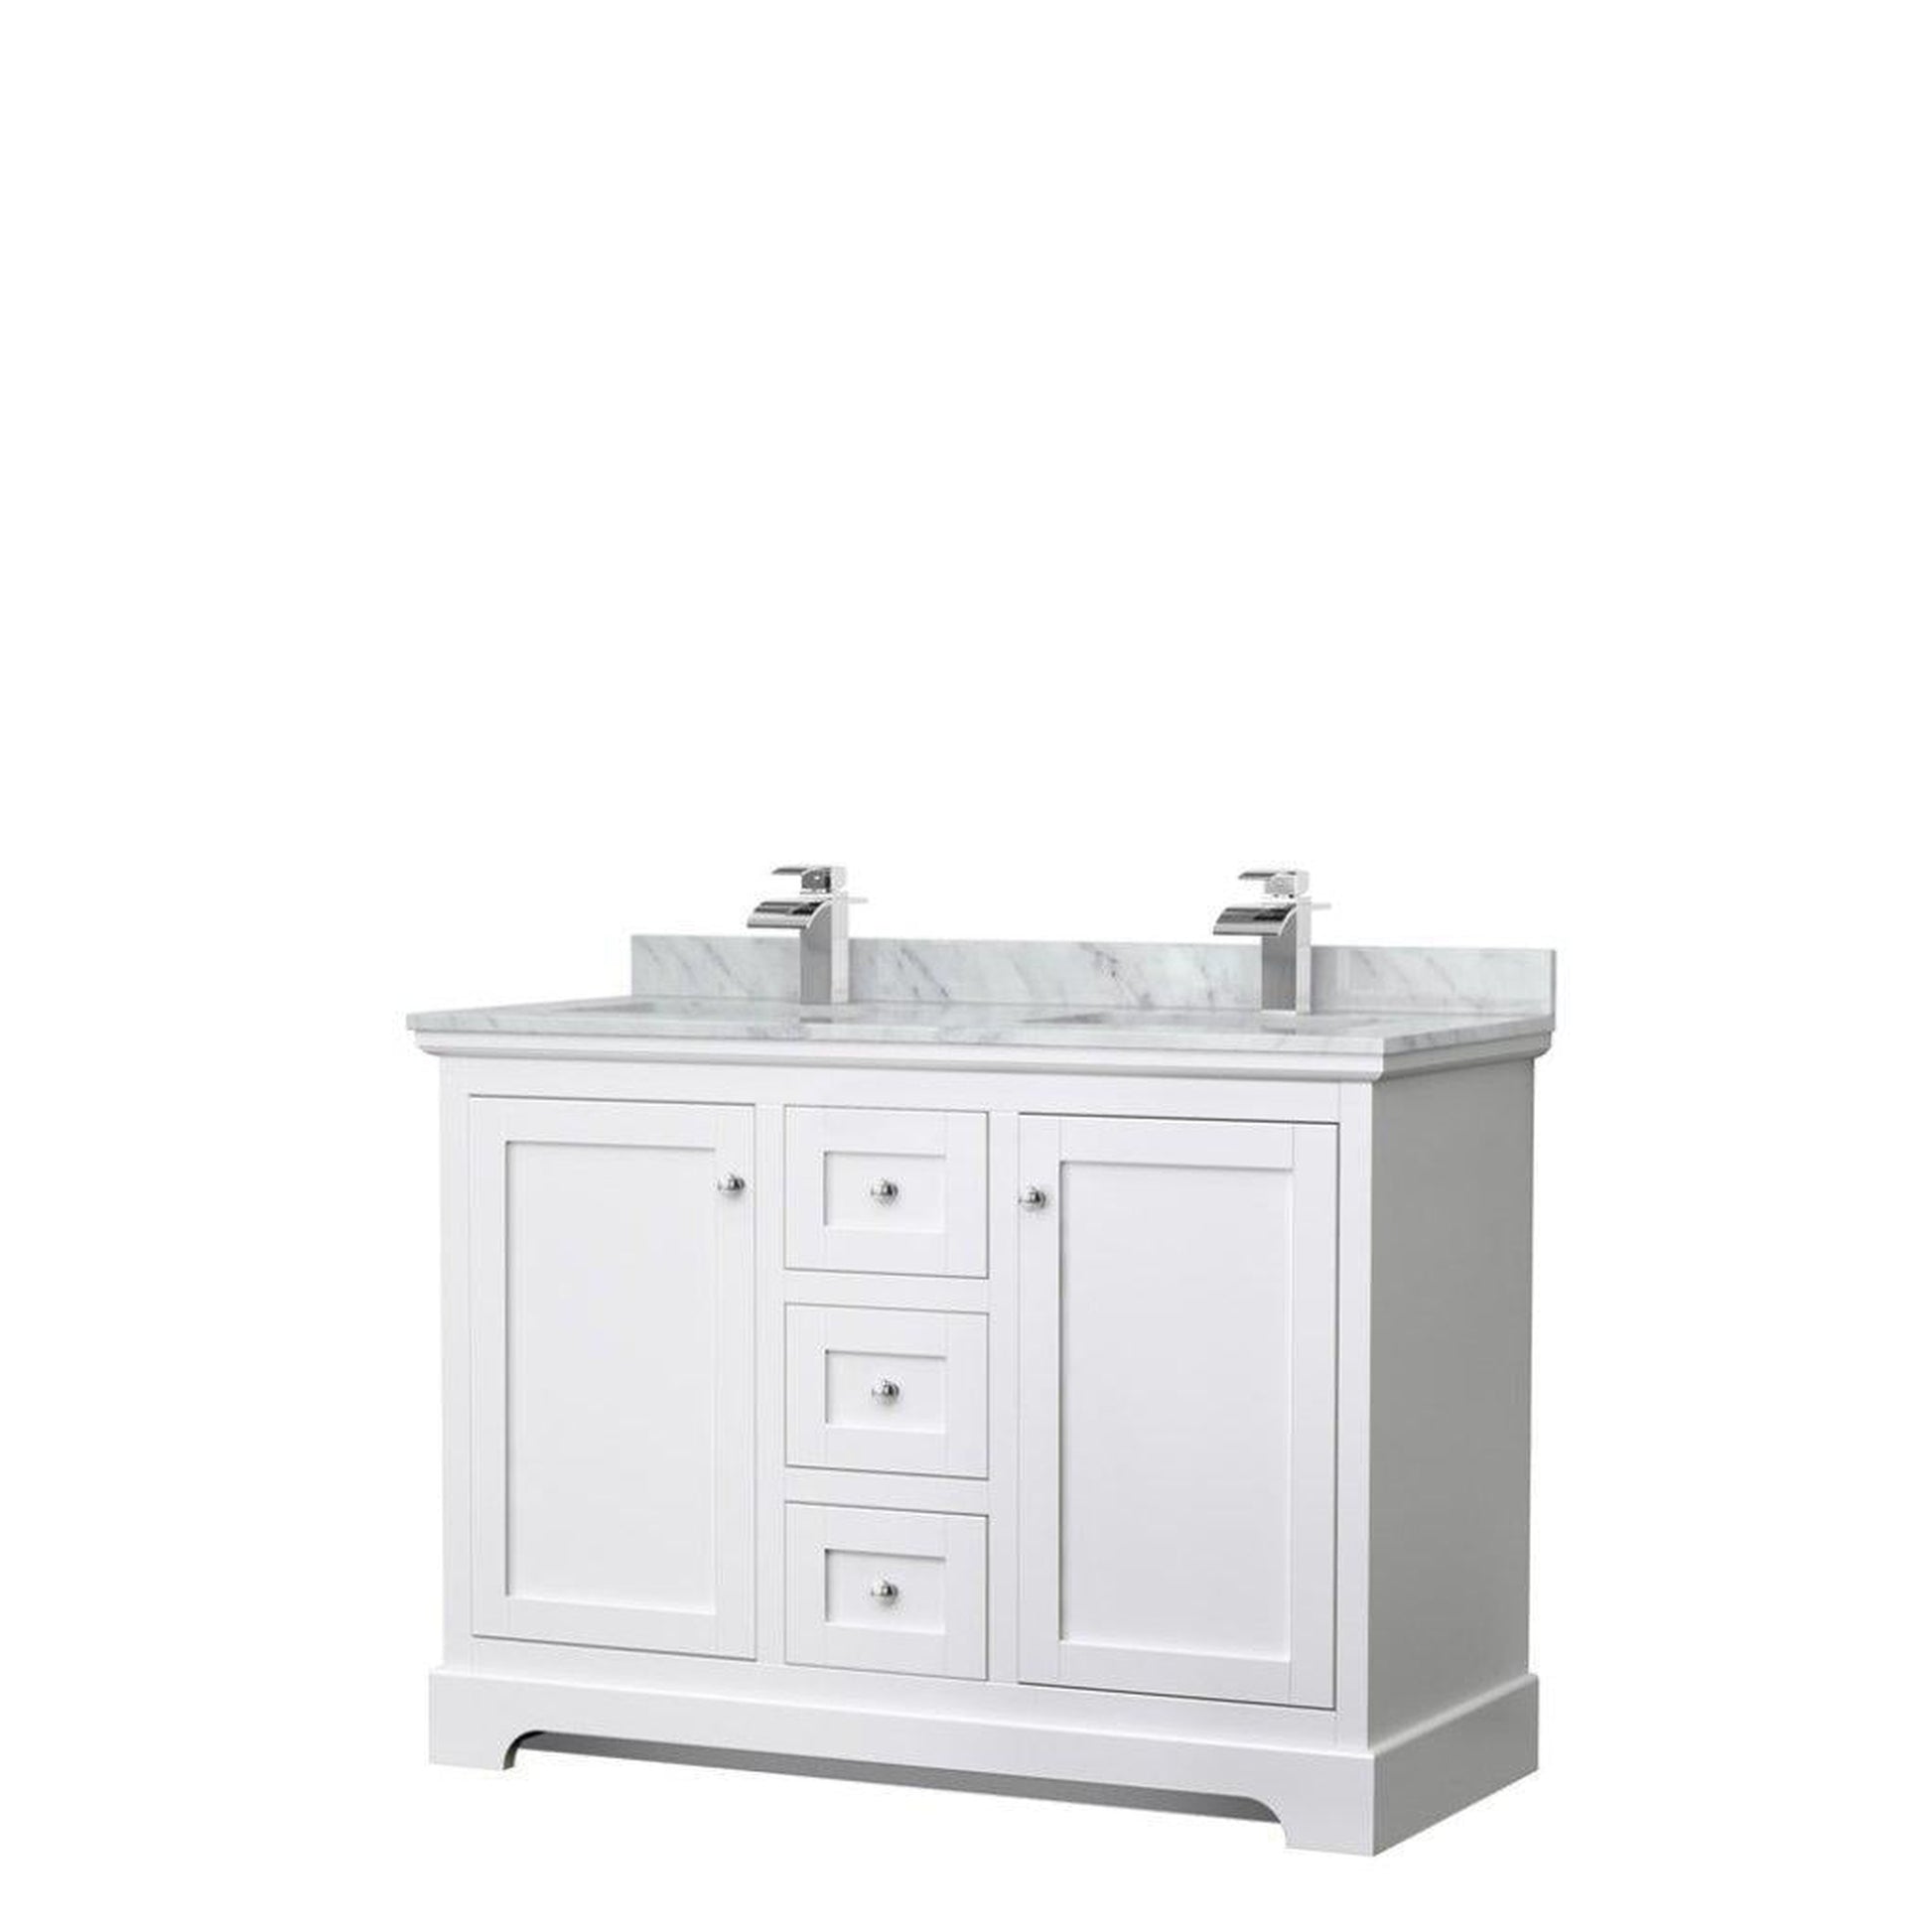 Wyndham Collection Avery 48" White Double Bathroom Vanity, White Carrara Marble Countertop With 1-Hole Faucet, Square Sink, Polished Chrome Trims